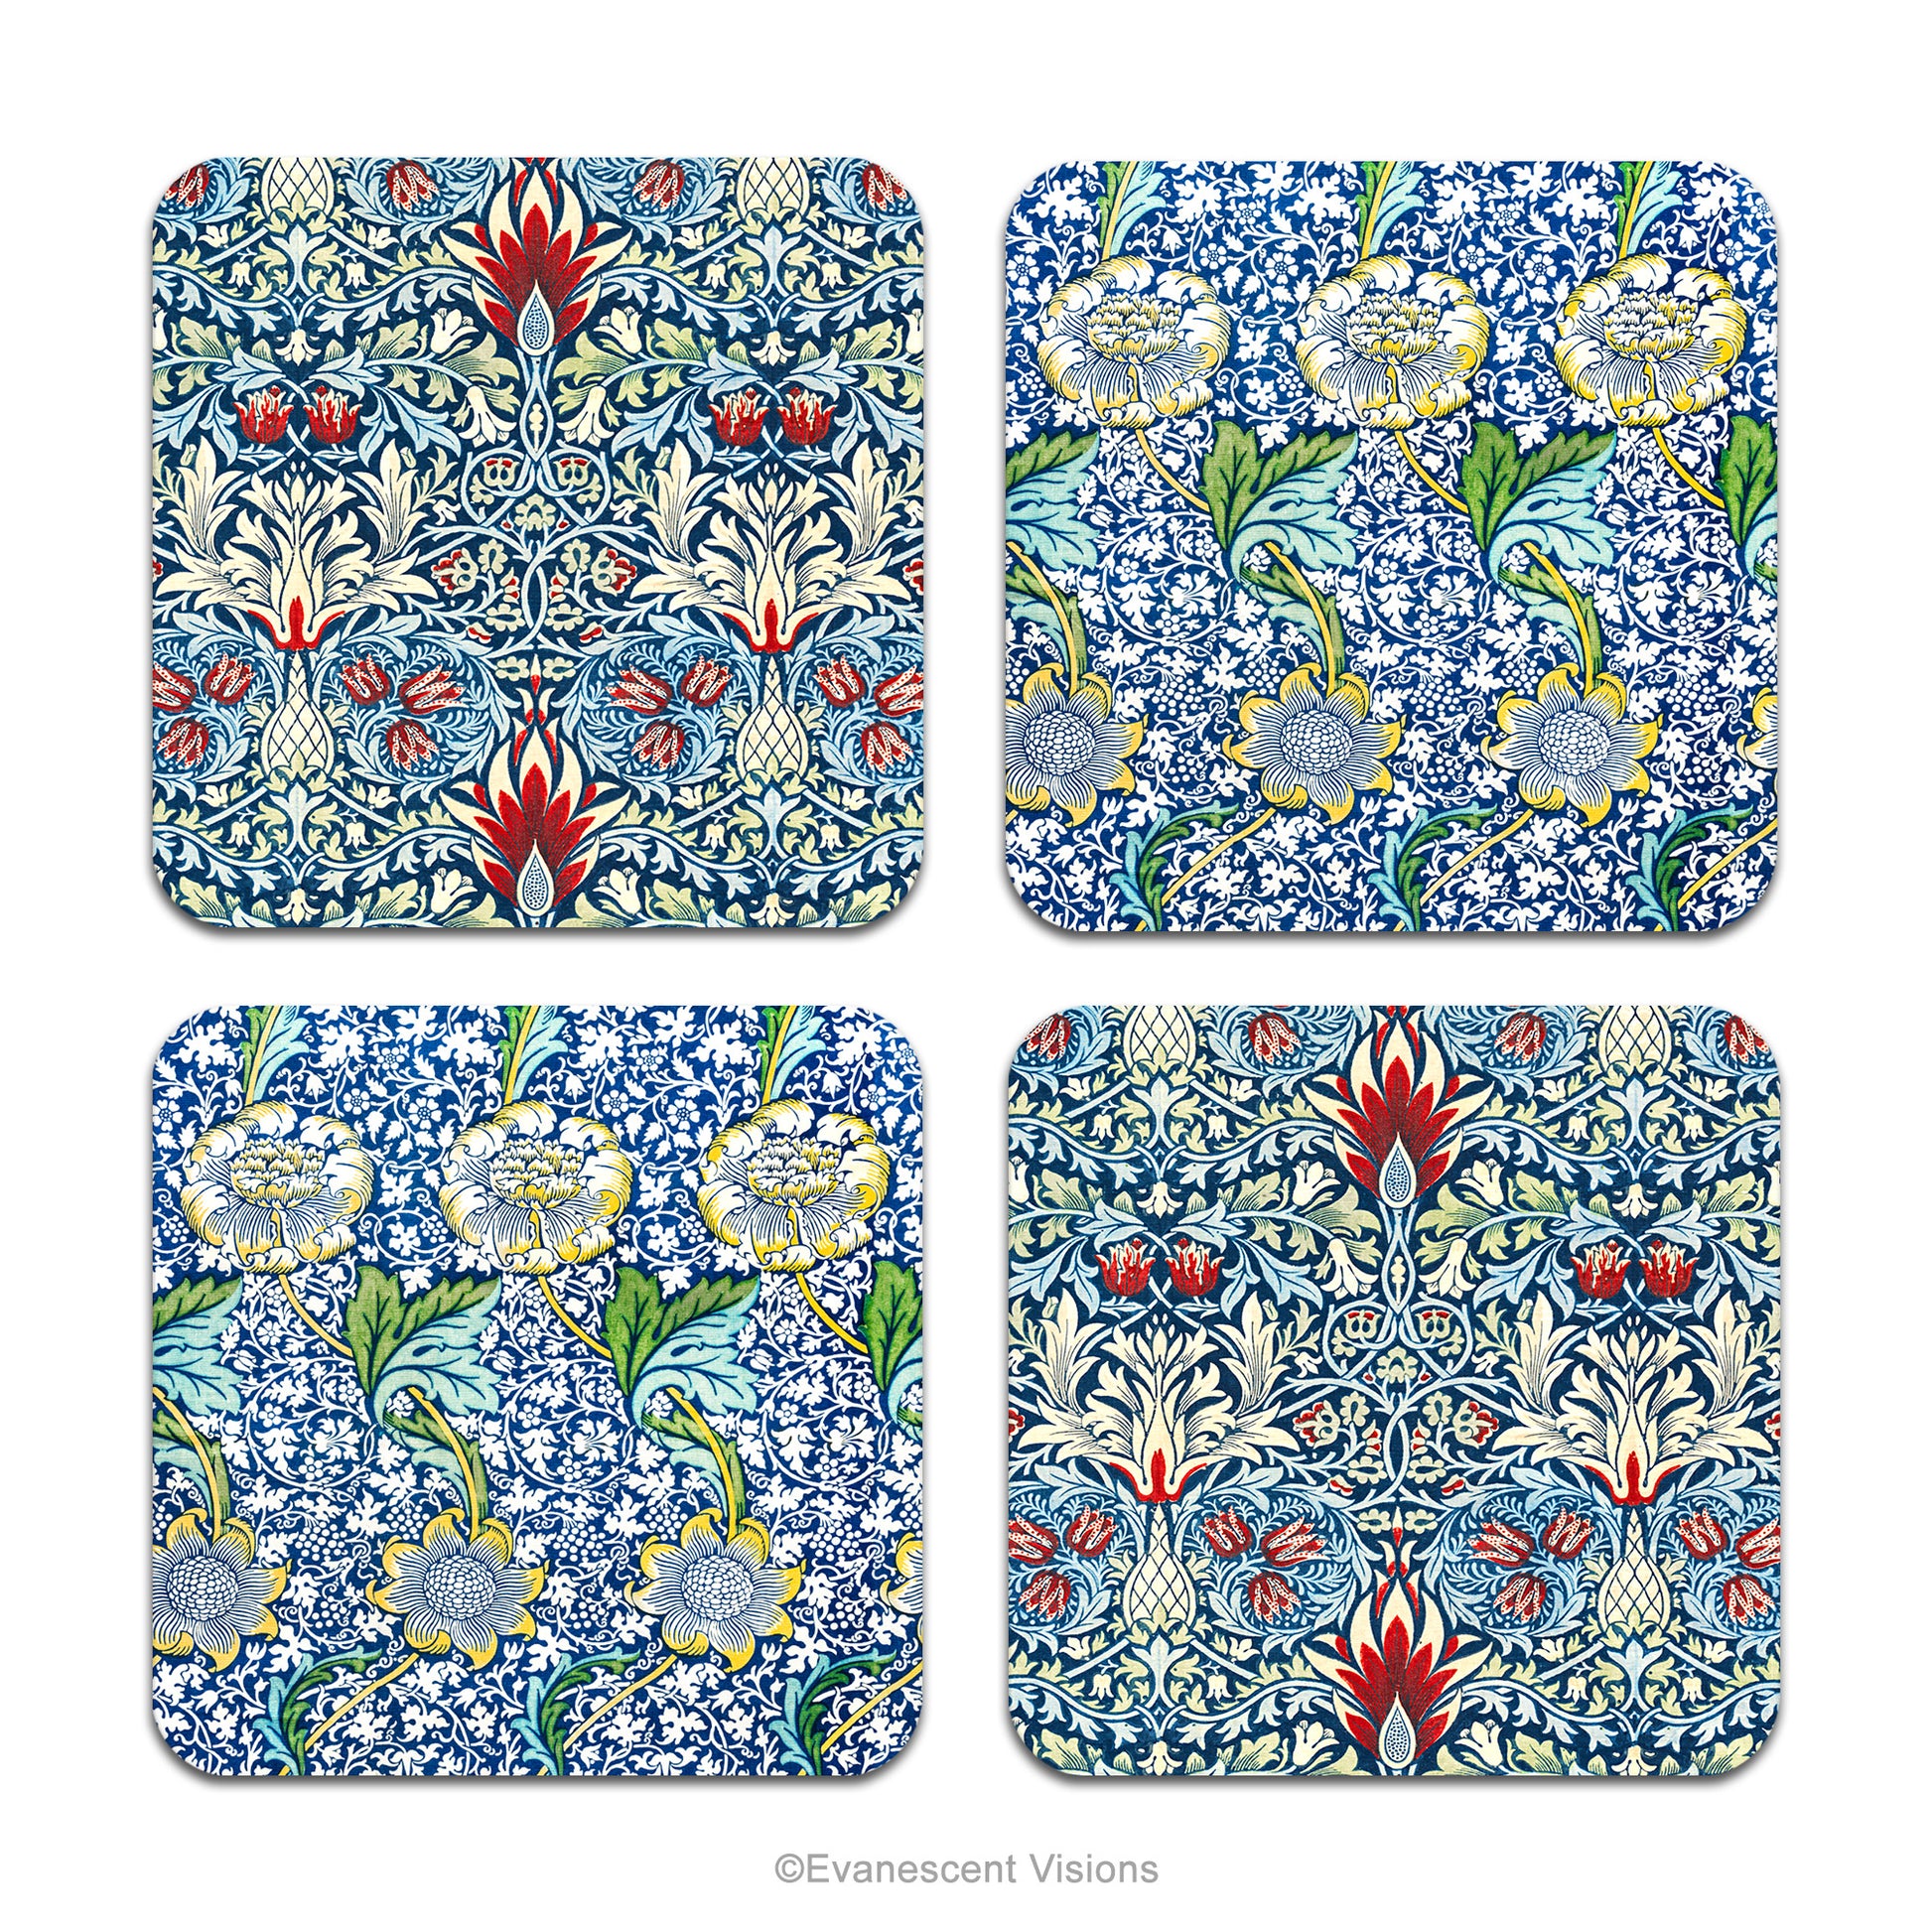 Set of 4 coasters with patterned images from the 'Snakeshead' and 'Kennet' designs by William Morris